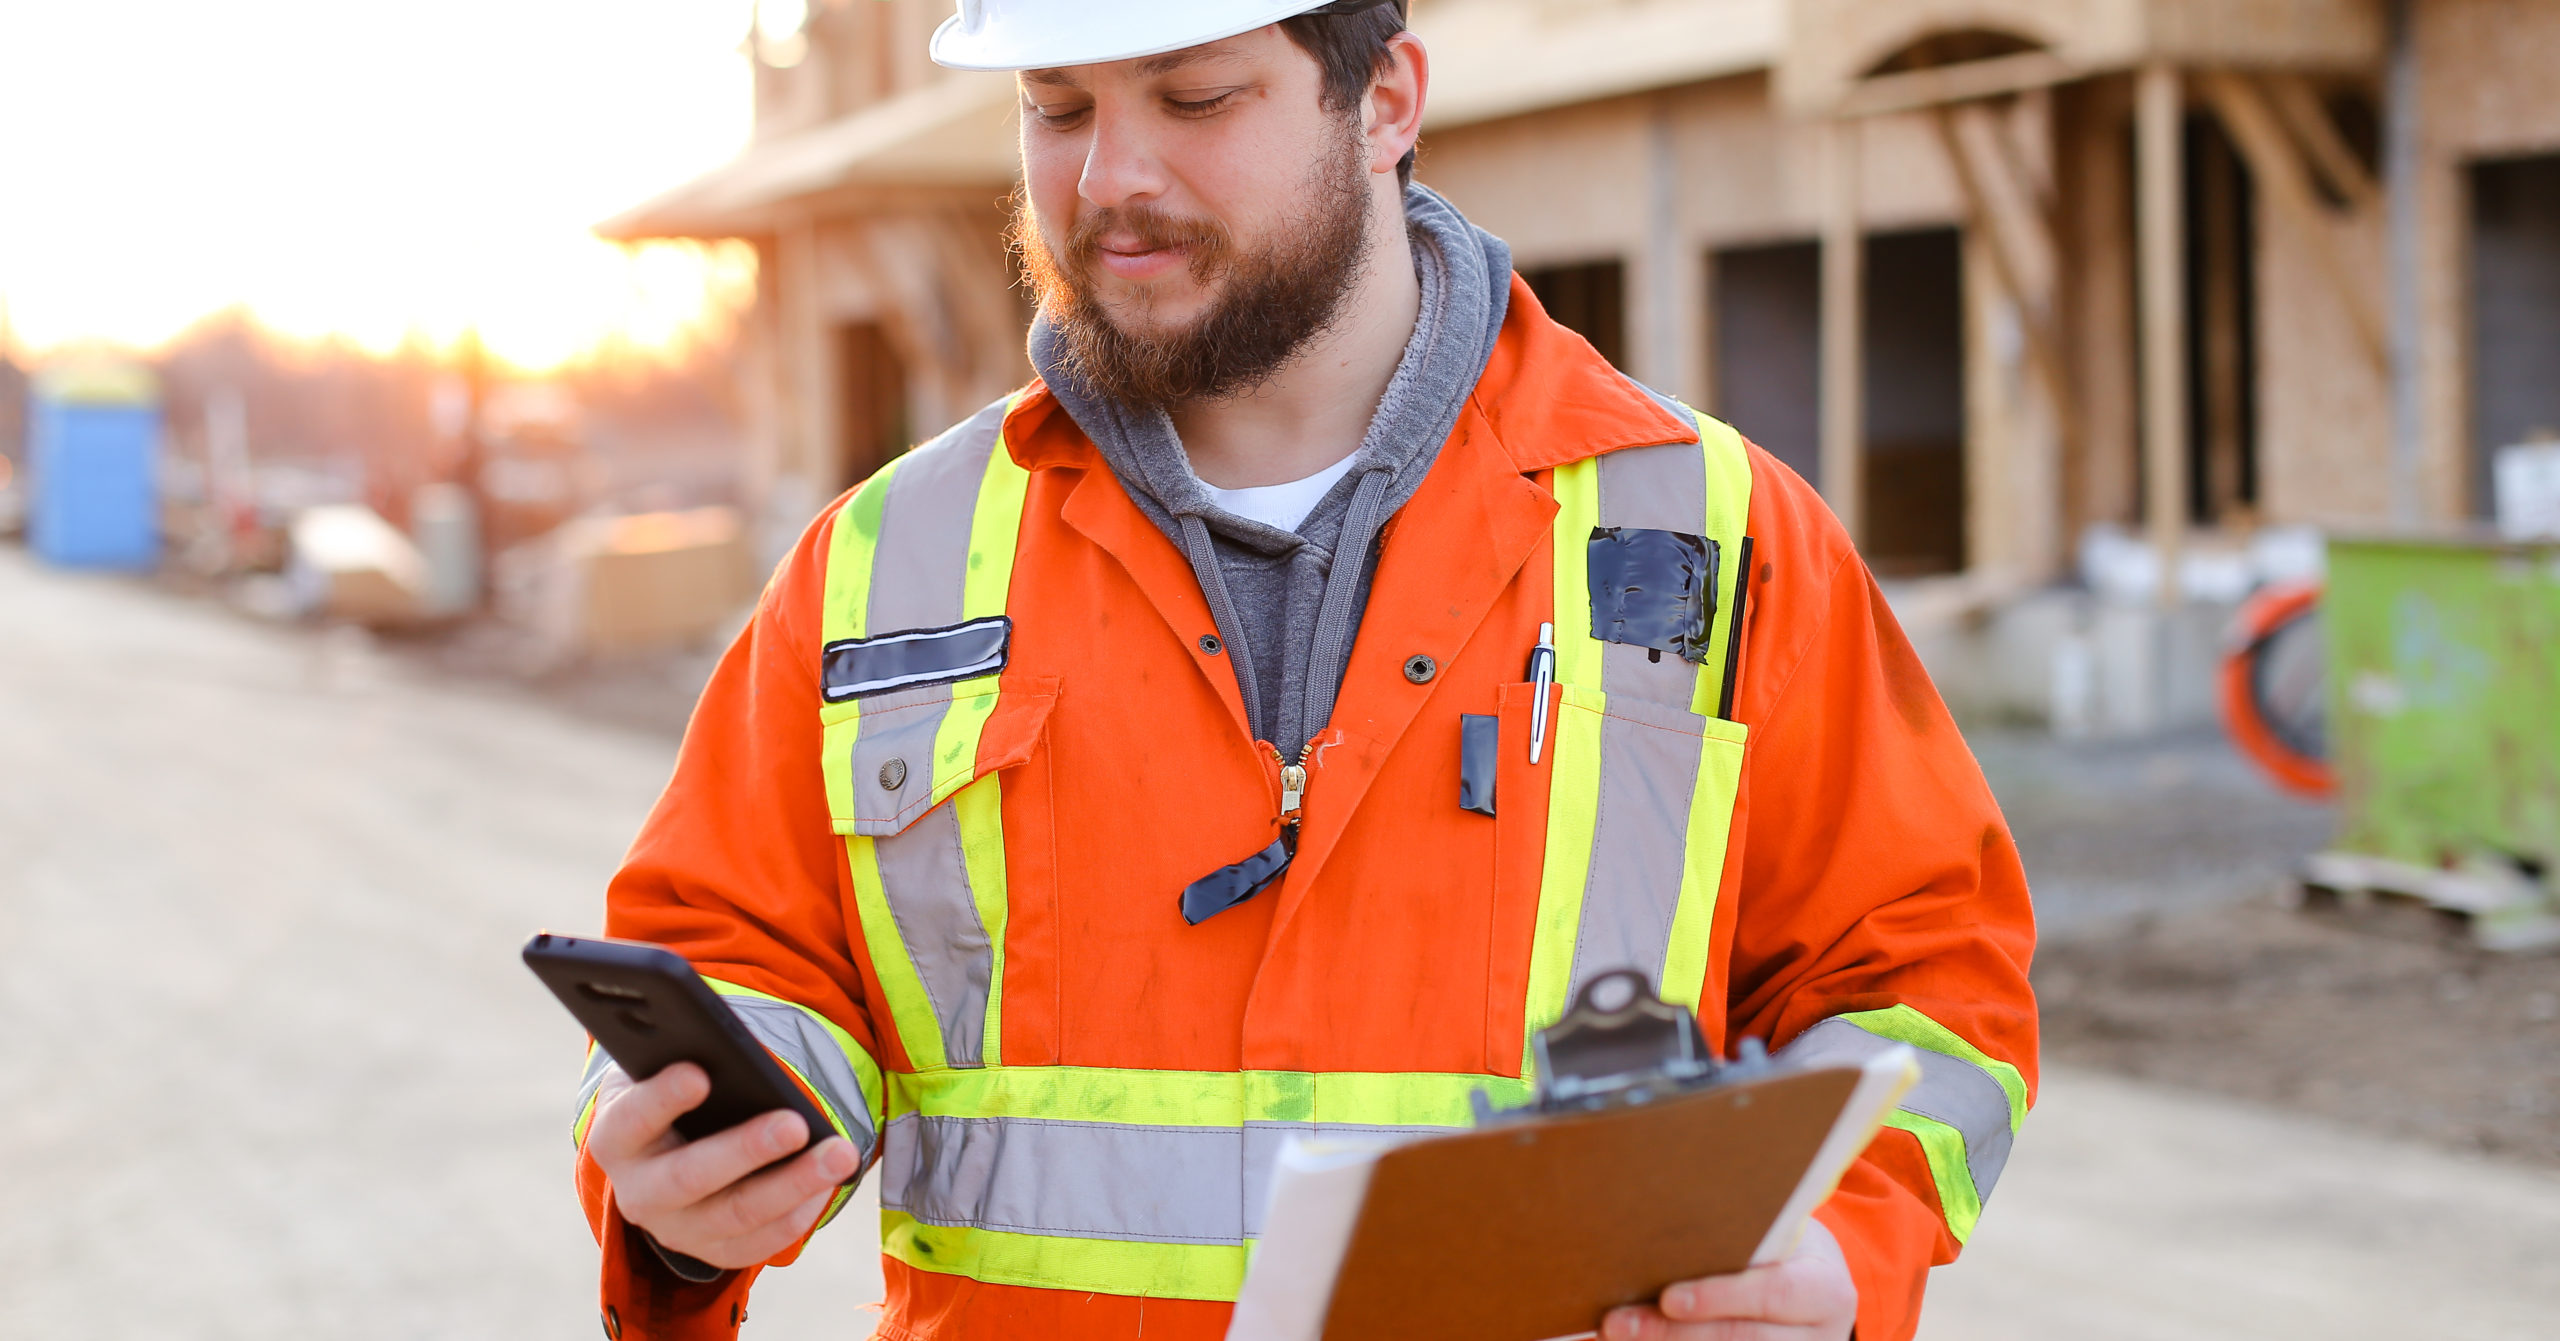 A builder is holding and looking at a smart phone in his right hand while holding a clipboard in his other hand.